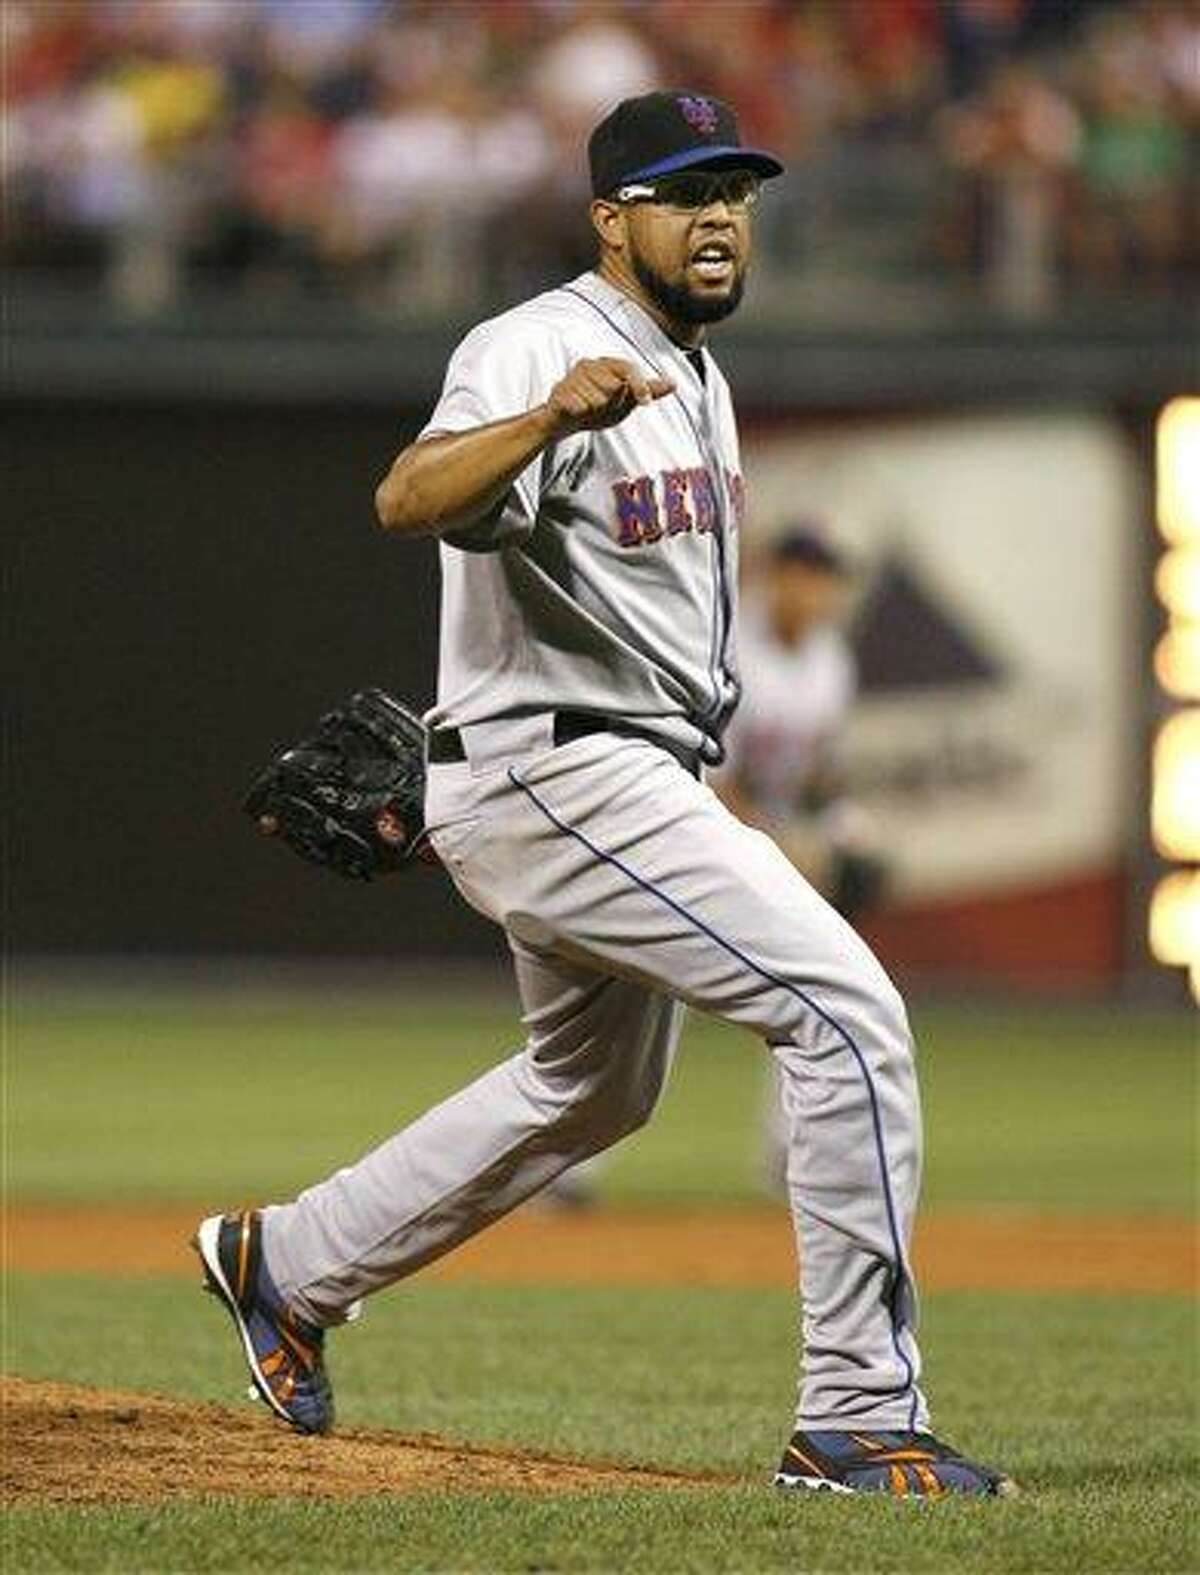 FILE - New York Mets pitcher Francisco Rodriguez celebrates after striking out Philadelphia Phillies' Domonic Brown to end the ninth inning of a baseball game in this Aug. 7, 2010 file photo taken in Philadelphia. Rodriguez is in custody after what police called a "physical assault" with his father-in-law after the Mets' 6-2 loss to the Colorado Rockies at Citi Field Wednesday Aug. 11, 2010. (AP Photo/H. Rumph Jr, File)